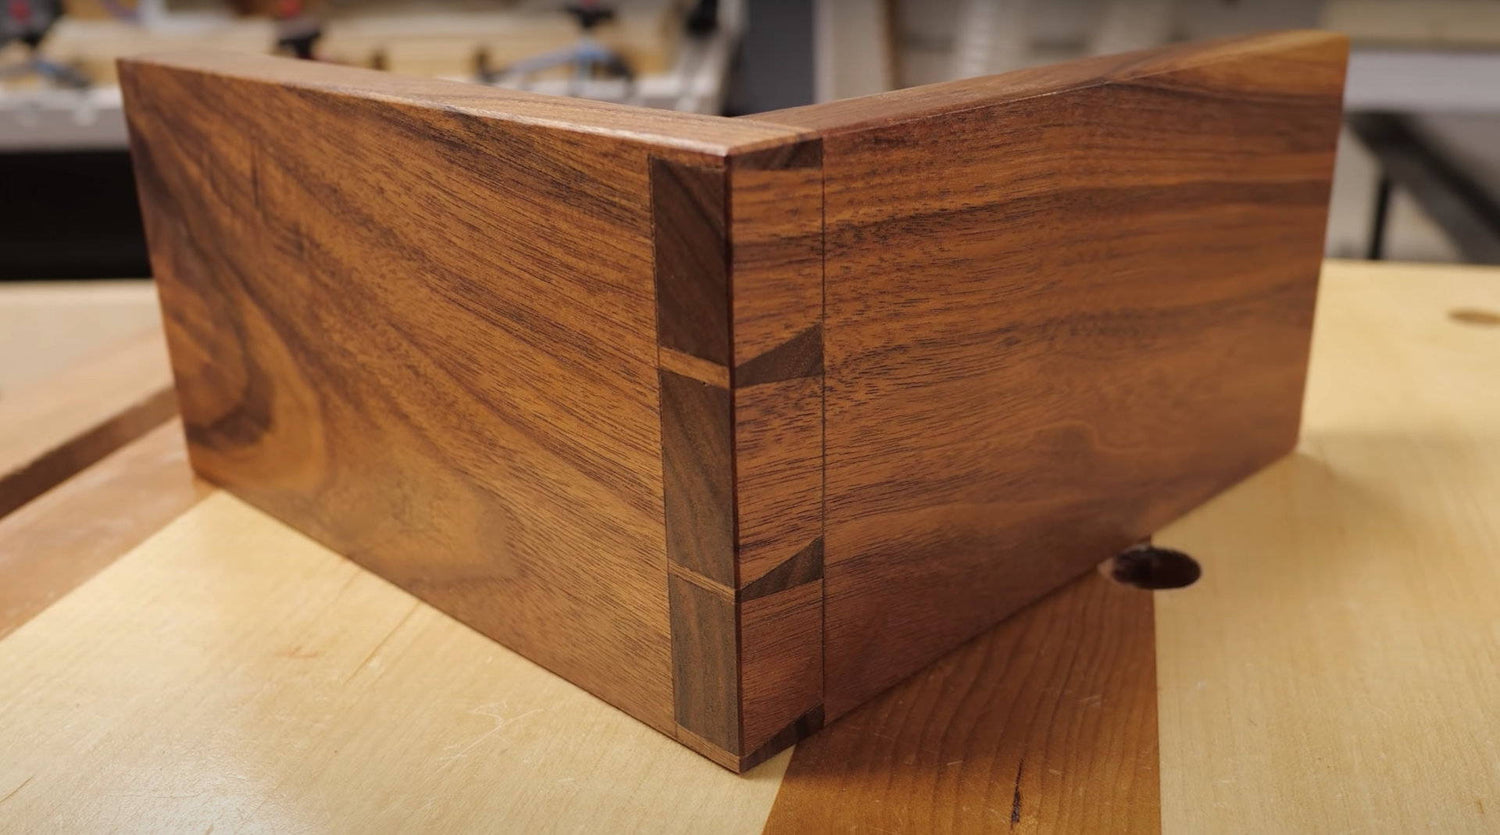 Cut Perfect Dovetails By Hand: A 10 Step Guide to Through Dovetail Joints